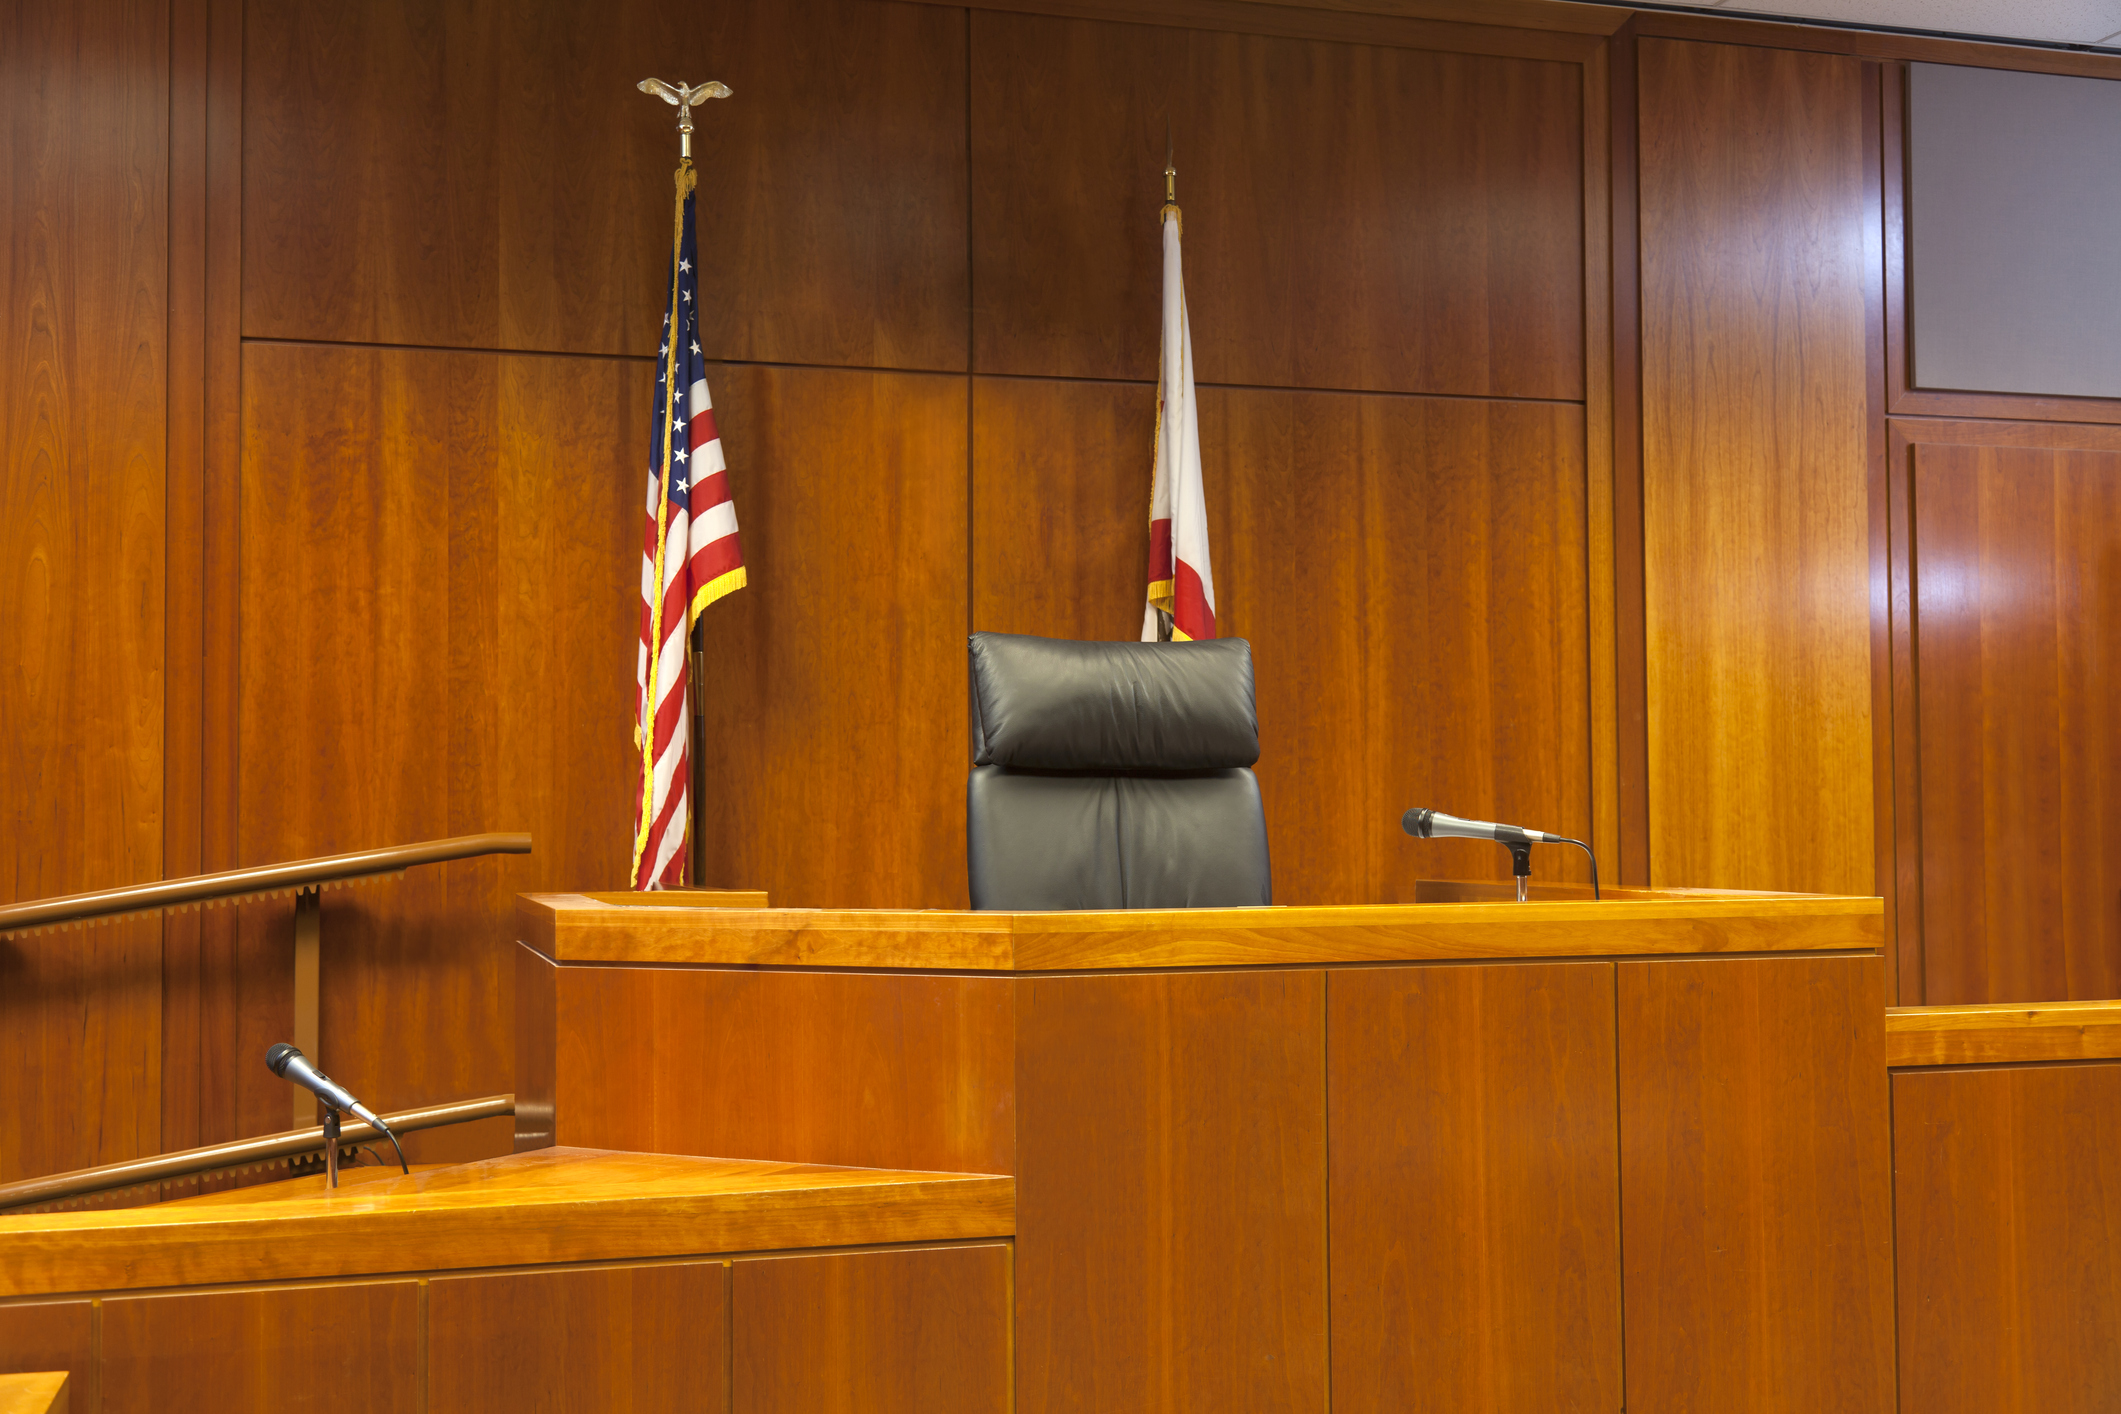 Courtroom Witness Stand and Bench